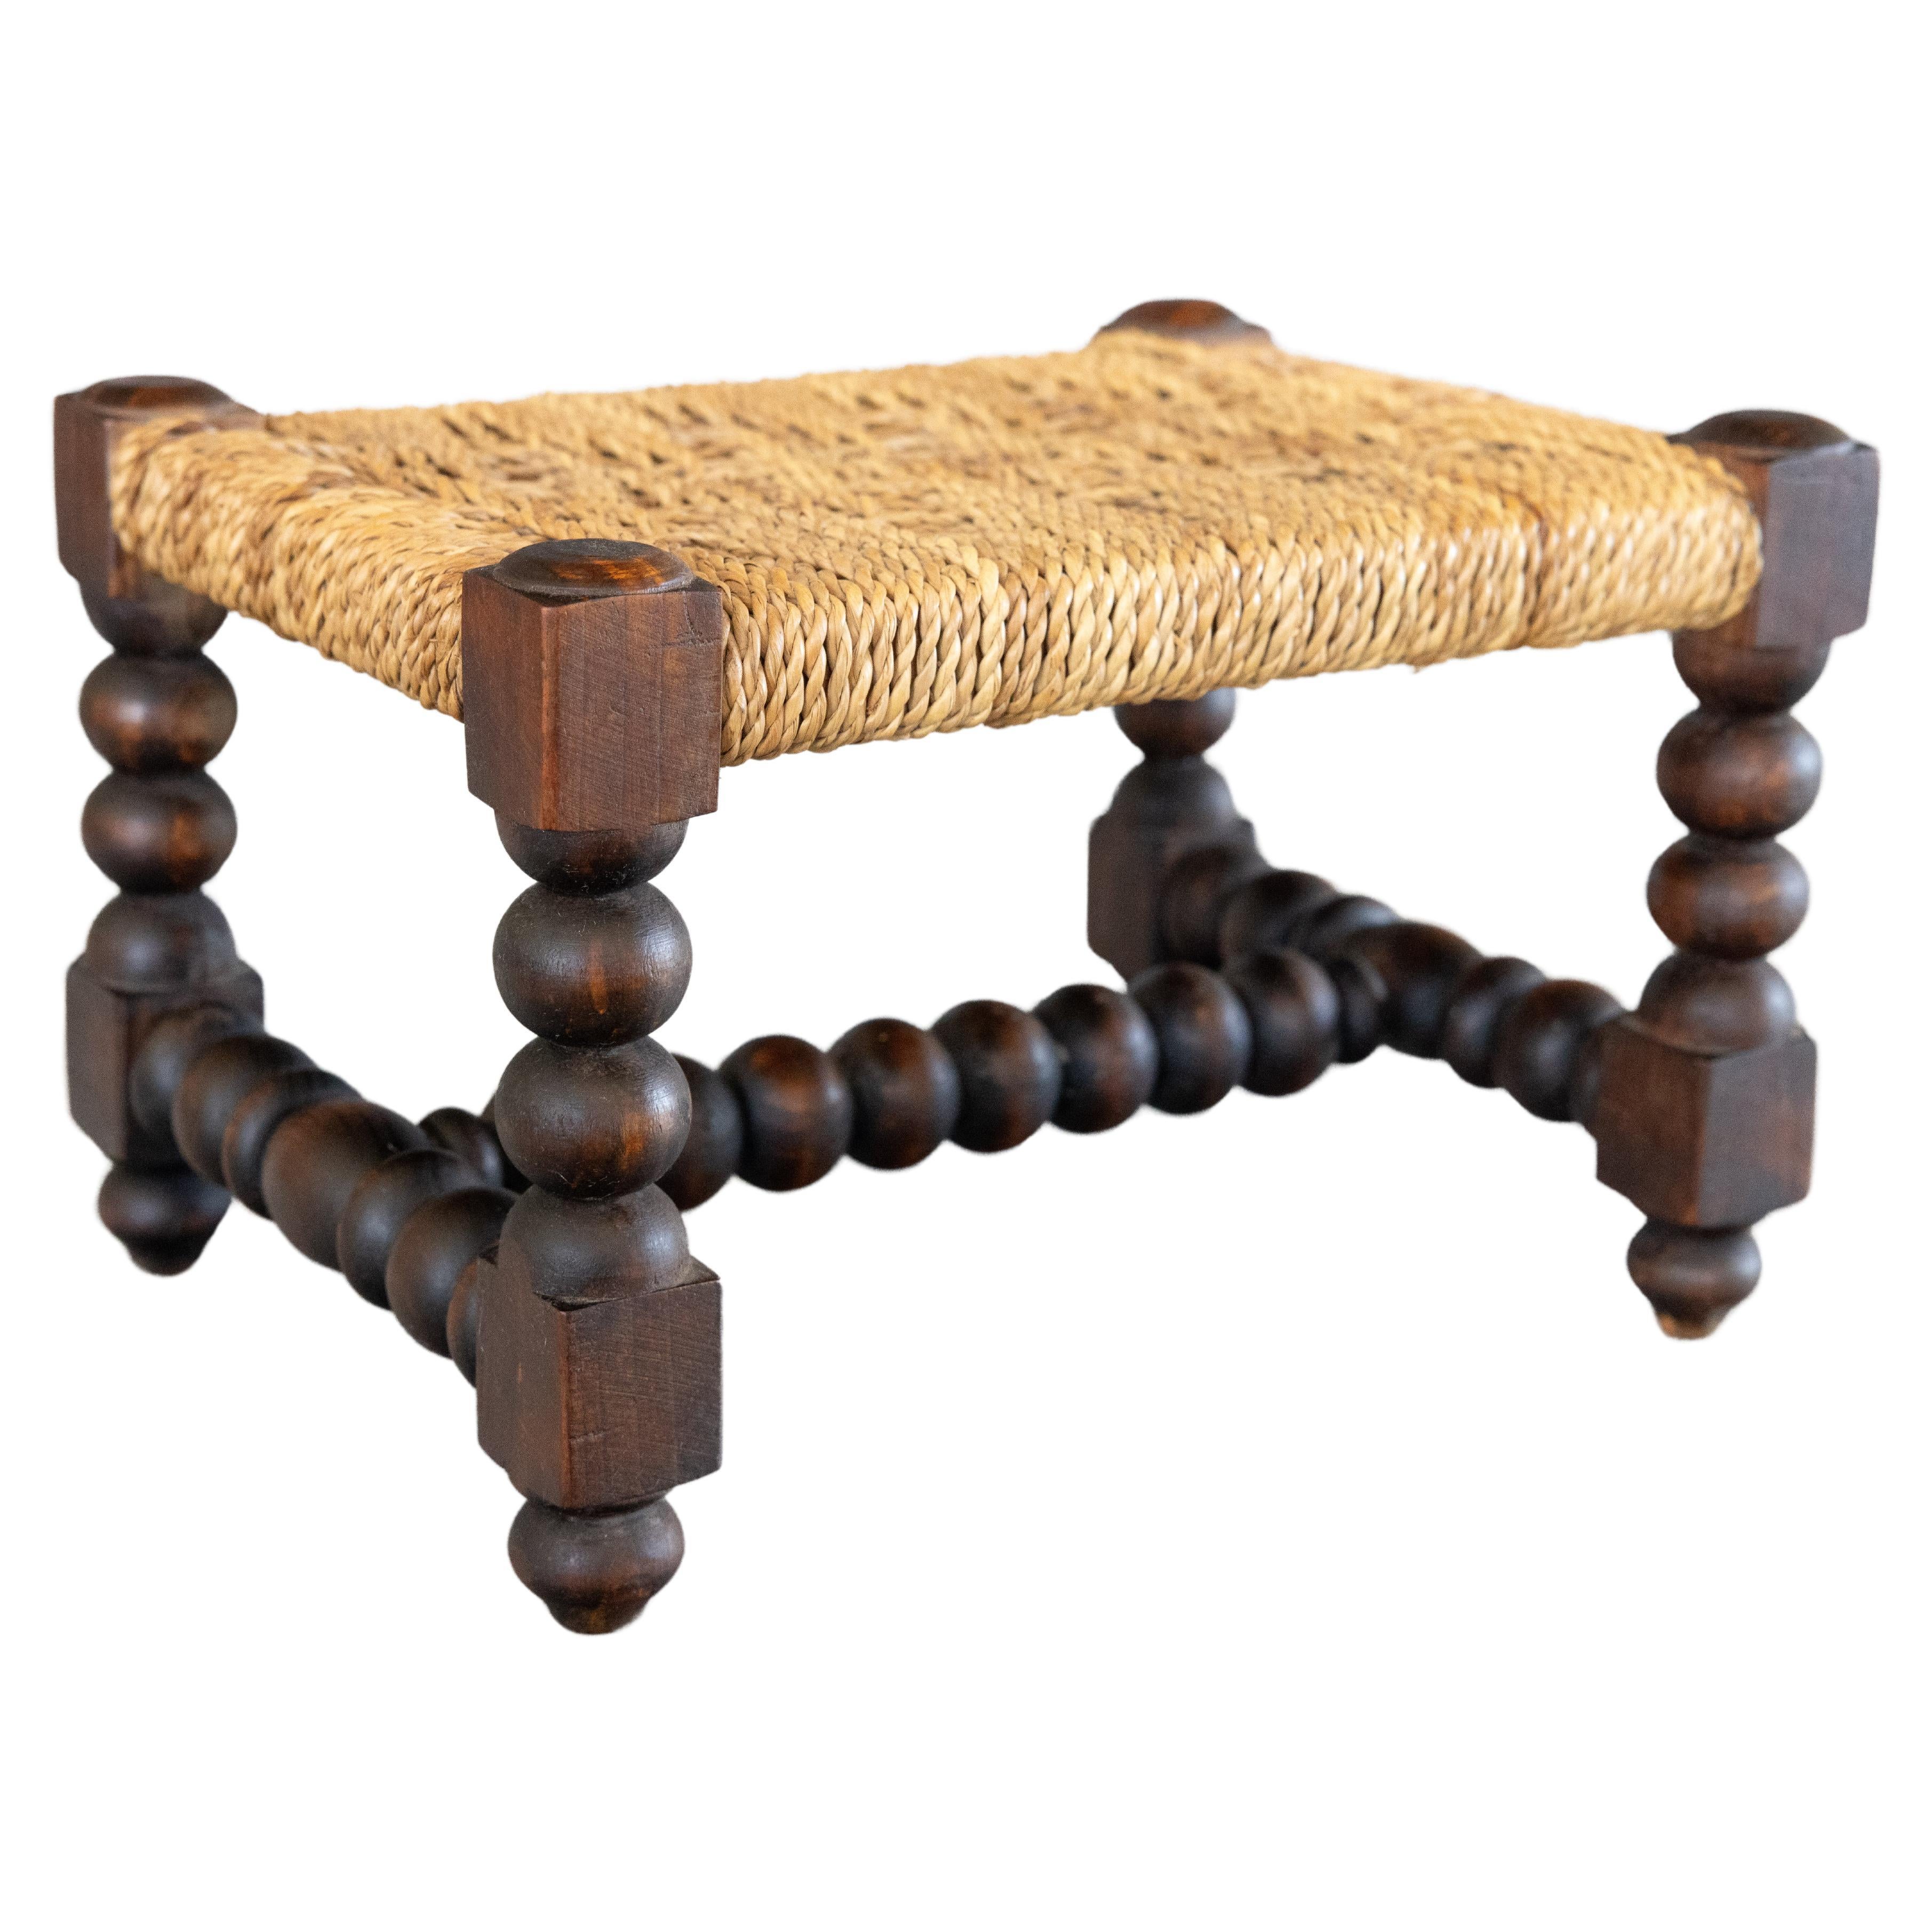 Antique Petite English Oak Woven Cord Rope Footstool Riser or Stand circa 1920 For Sale